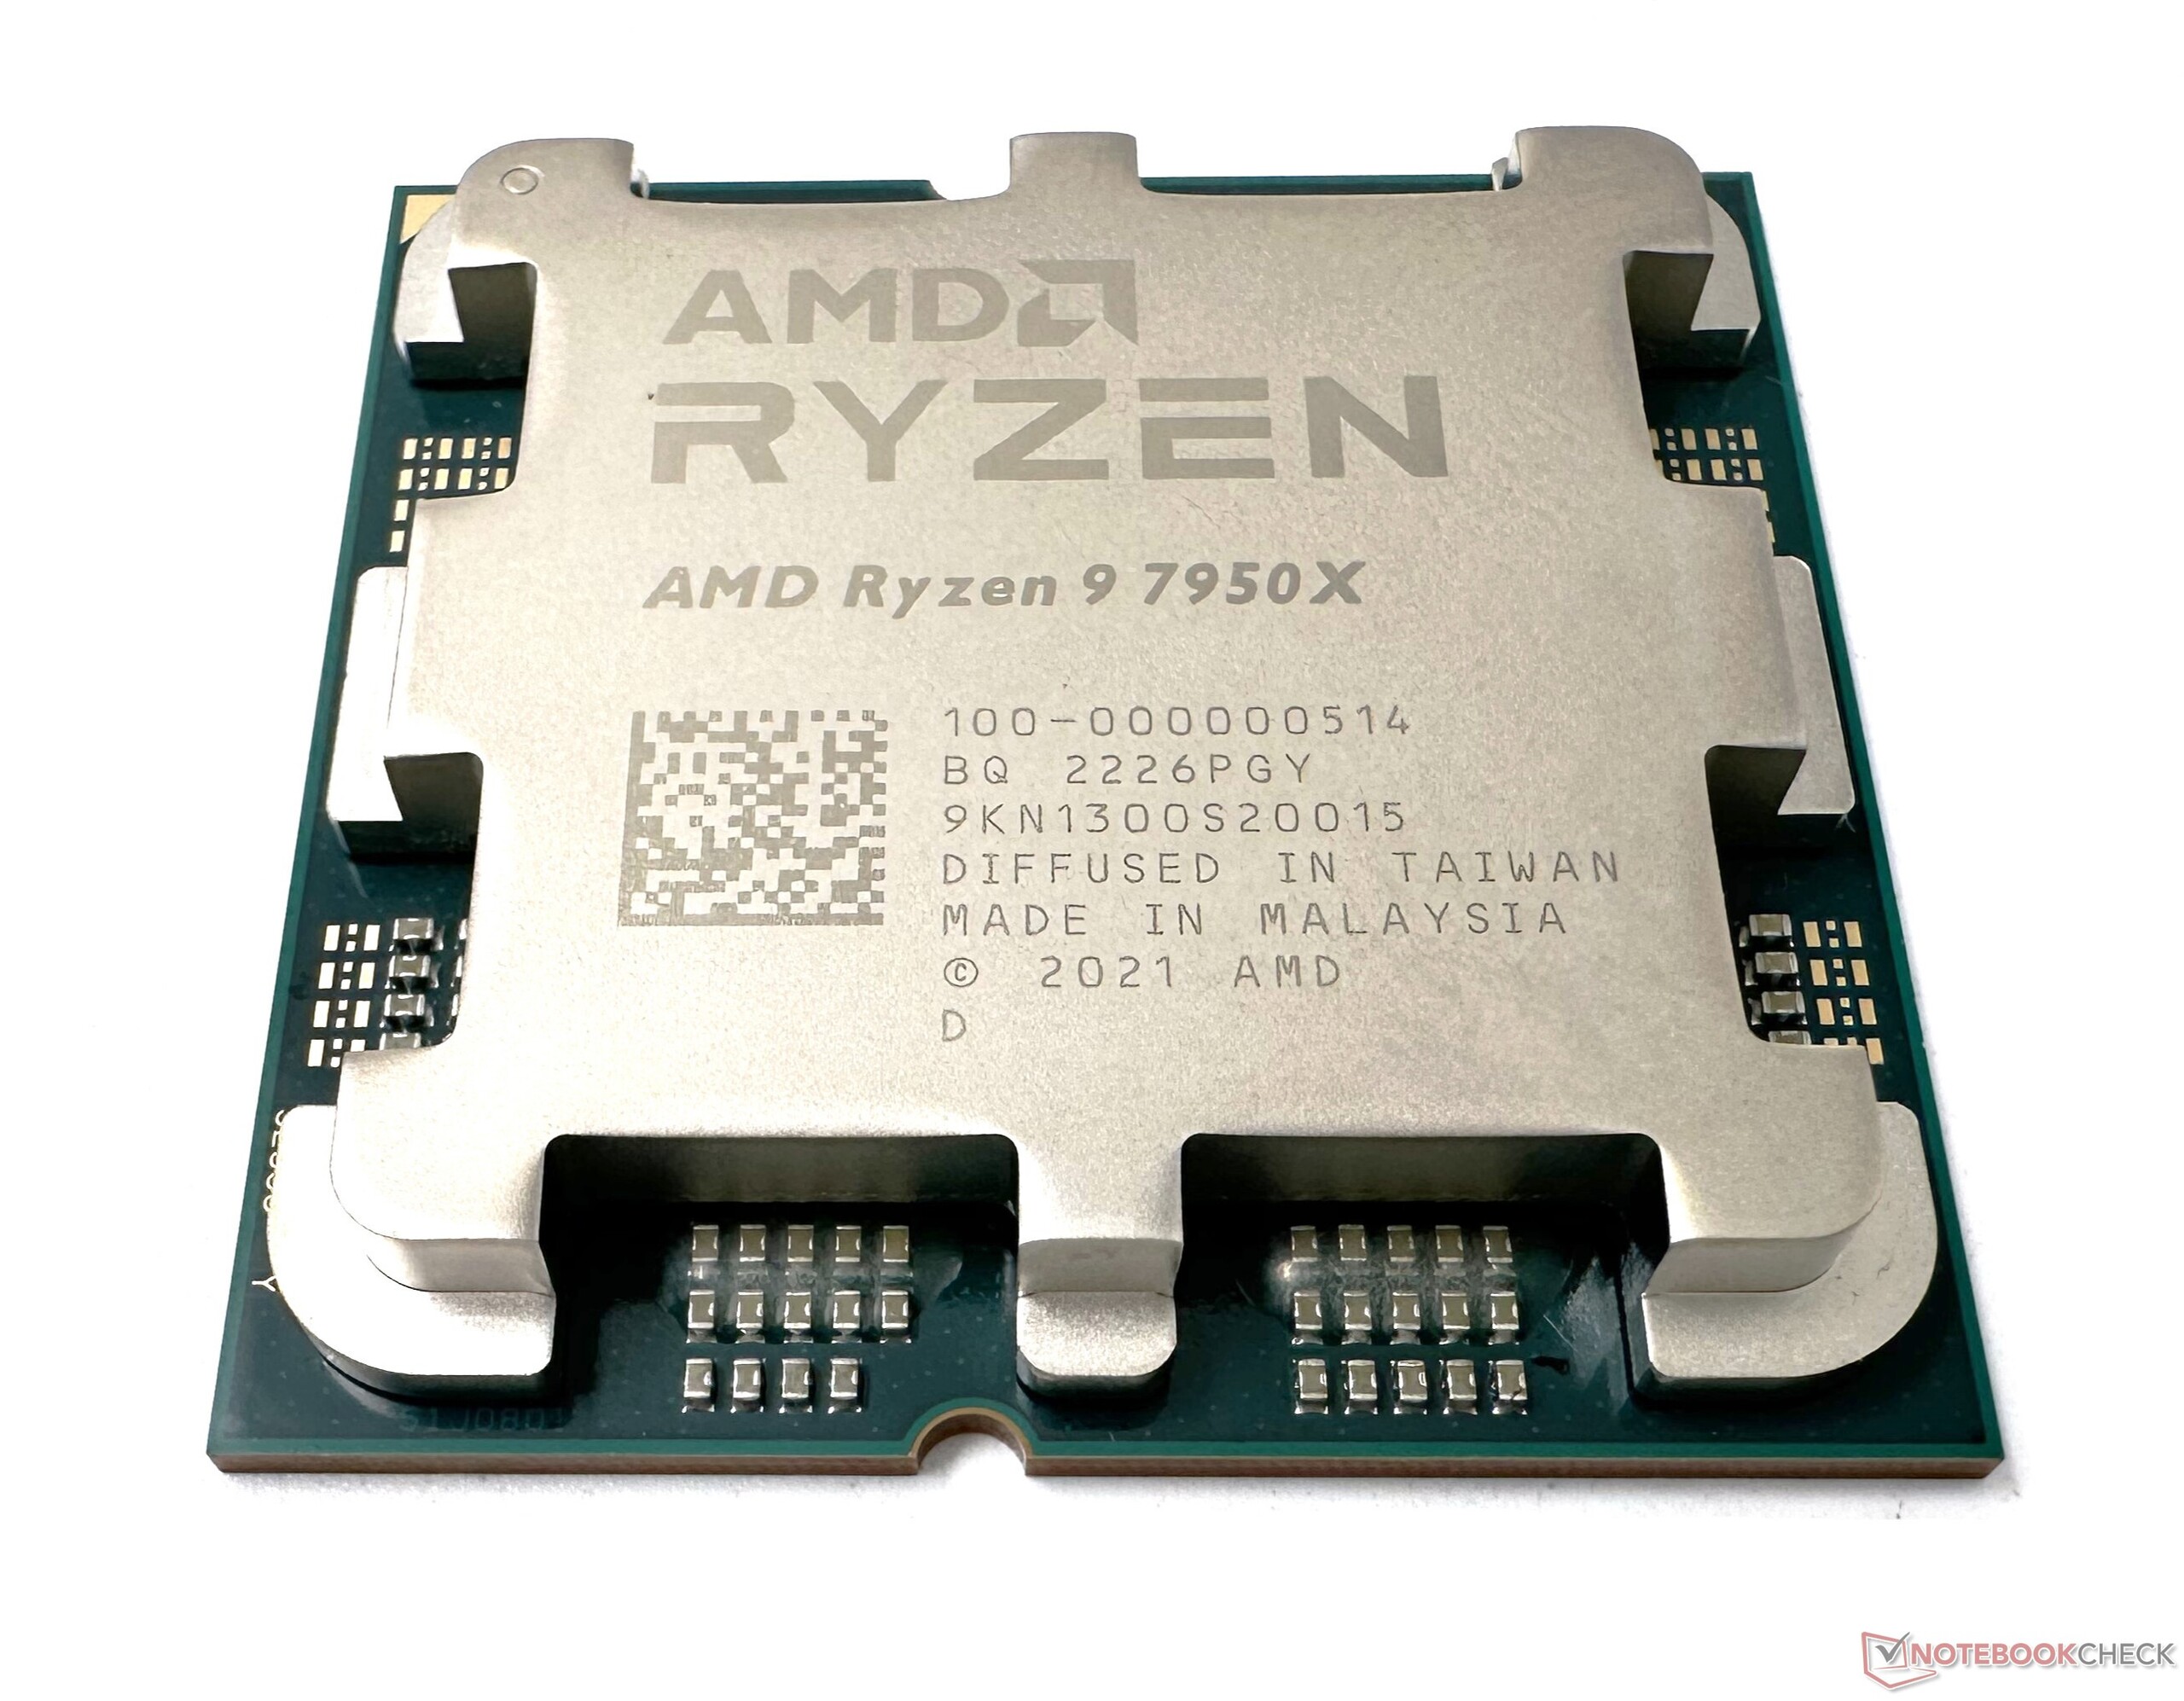 AMD Ryzen 9 7900X Review - Creator Might, Priced Right - Power